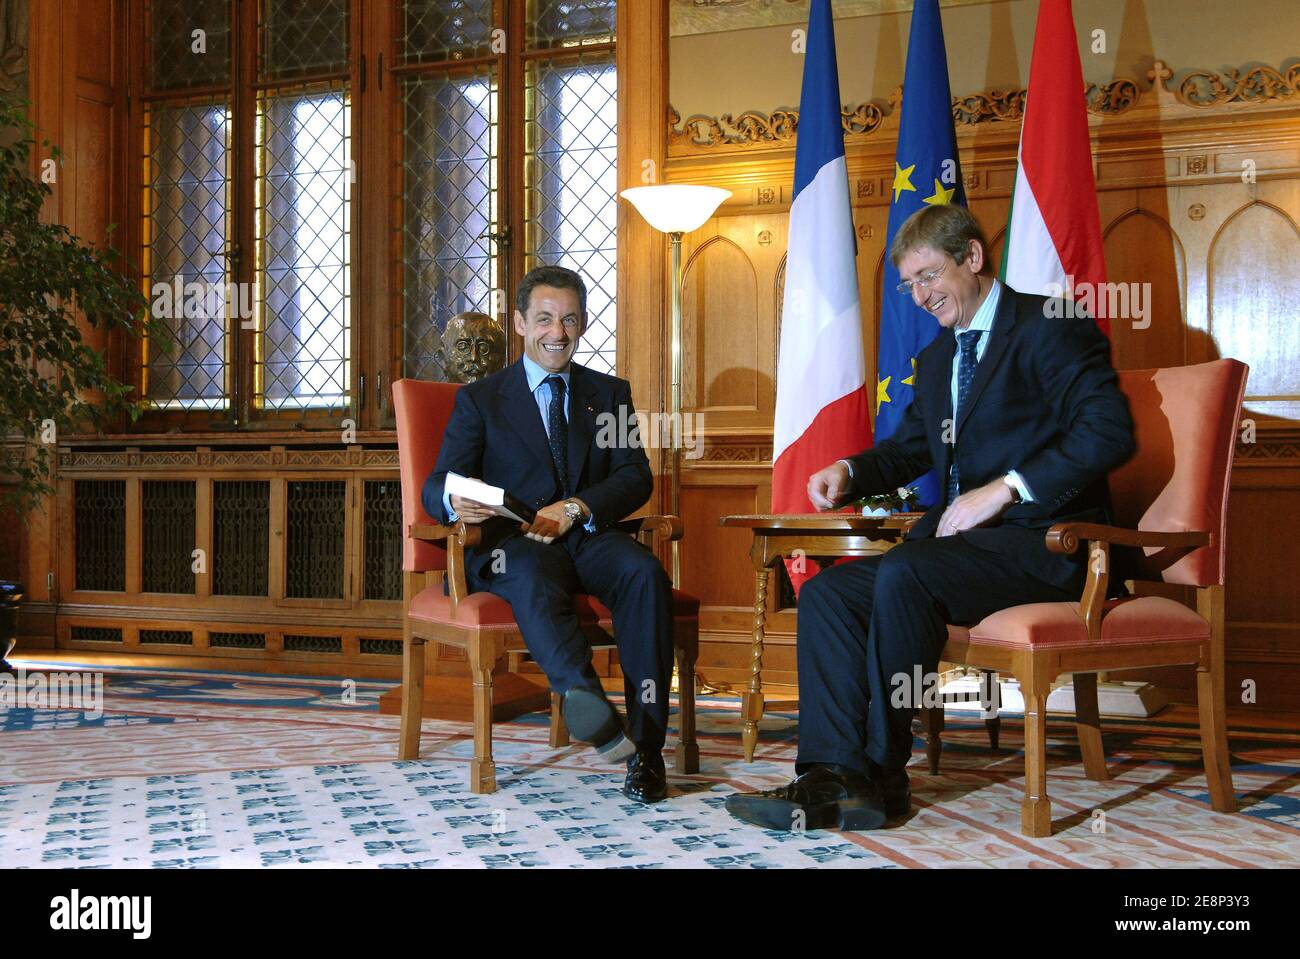 Hungarian Prime Minister Ferenc Gyurcsany (R) shares a laugh with French President Nicolas Sarkozy in the Parliament building as part of his one-day official visit in Budapest, Hungary, on September 14, 2007. Photo by Christophe Guibbaud/ABACAPRESS.COM Stock Photo